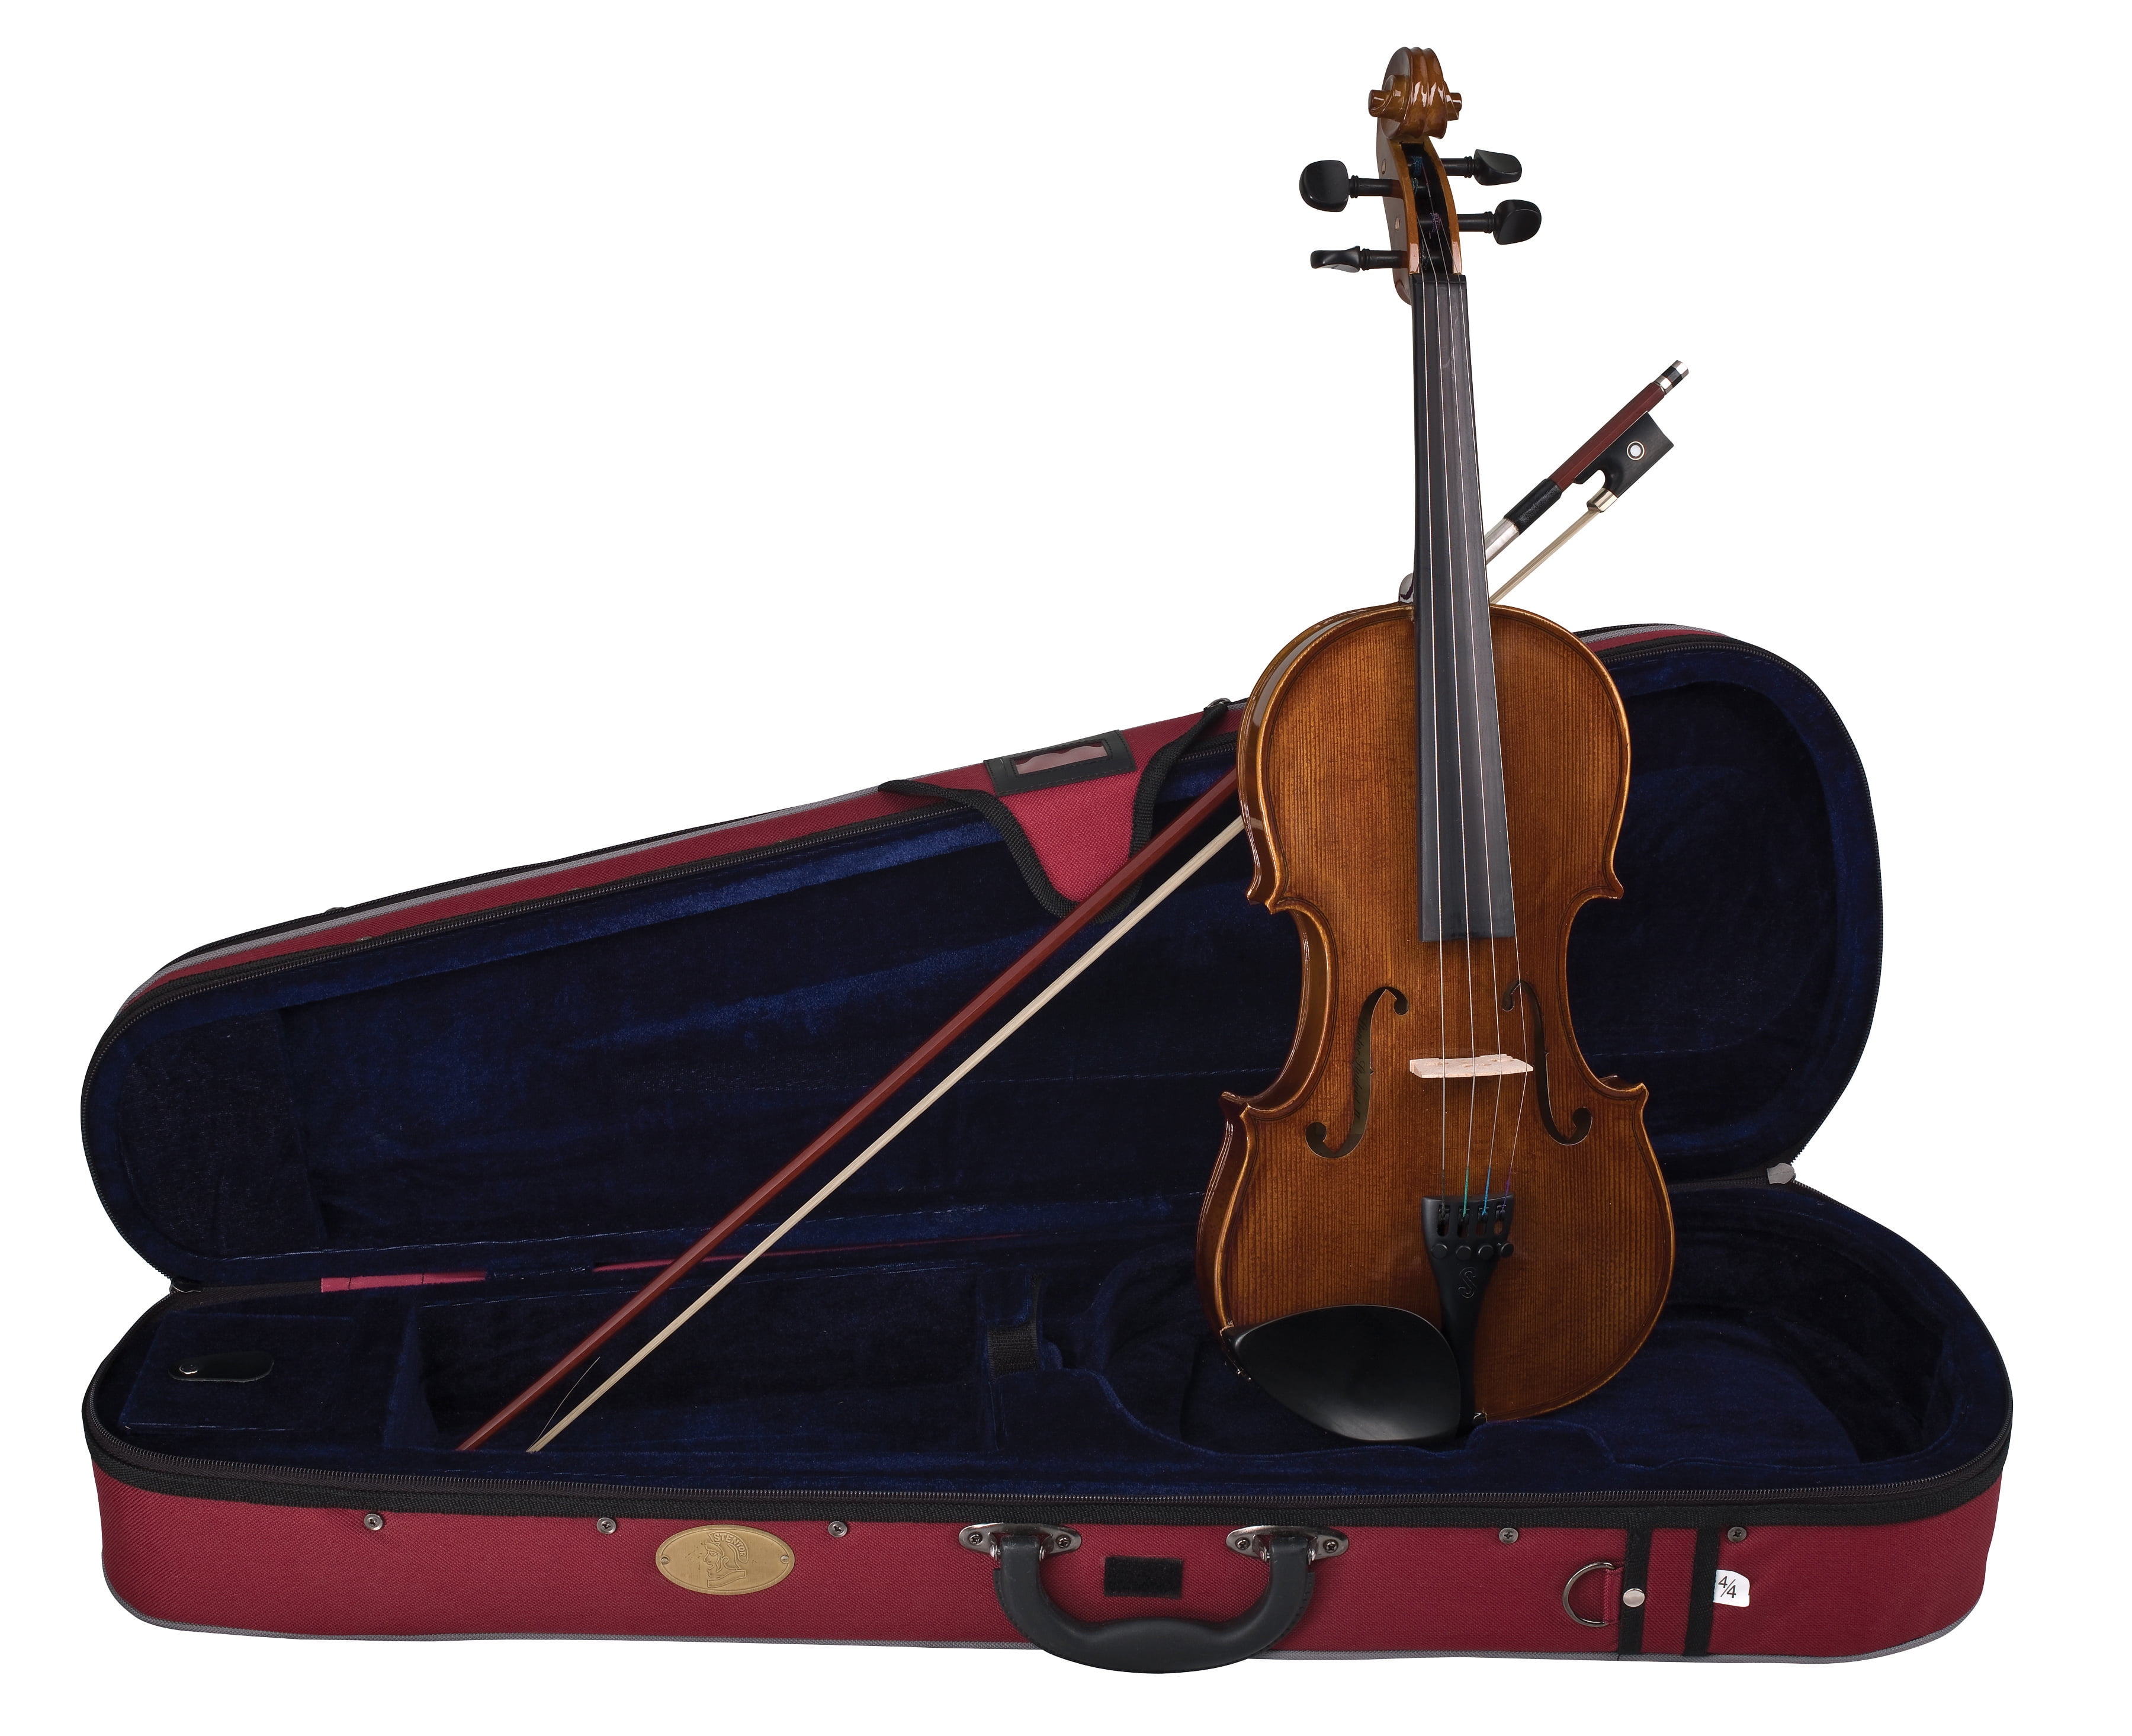 Hand Crafted with Fine Grained Solid Spruce Top with Zorro Sounds Violin Polishing Cloth stentor violin 4/4 Made from quality tonewoods Stentor 1500-4/4 Violin Student II Outfit 4 String Violin 